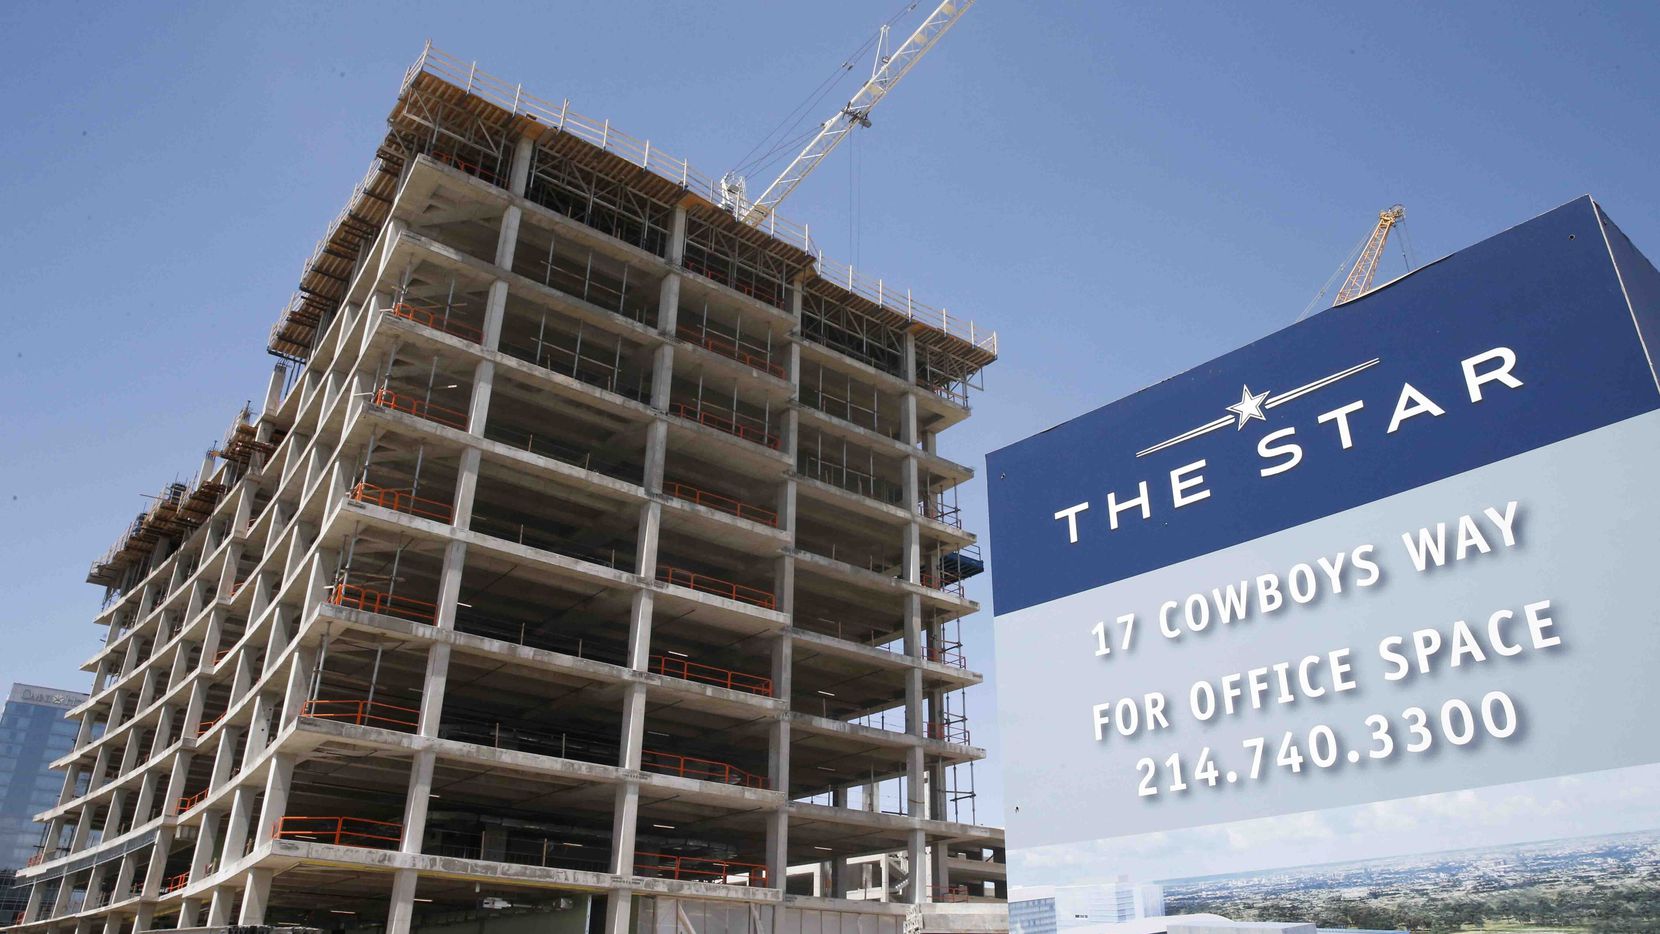 An 11-story office tower is under construction on the Dallas North Tollway that is the next...